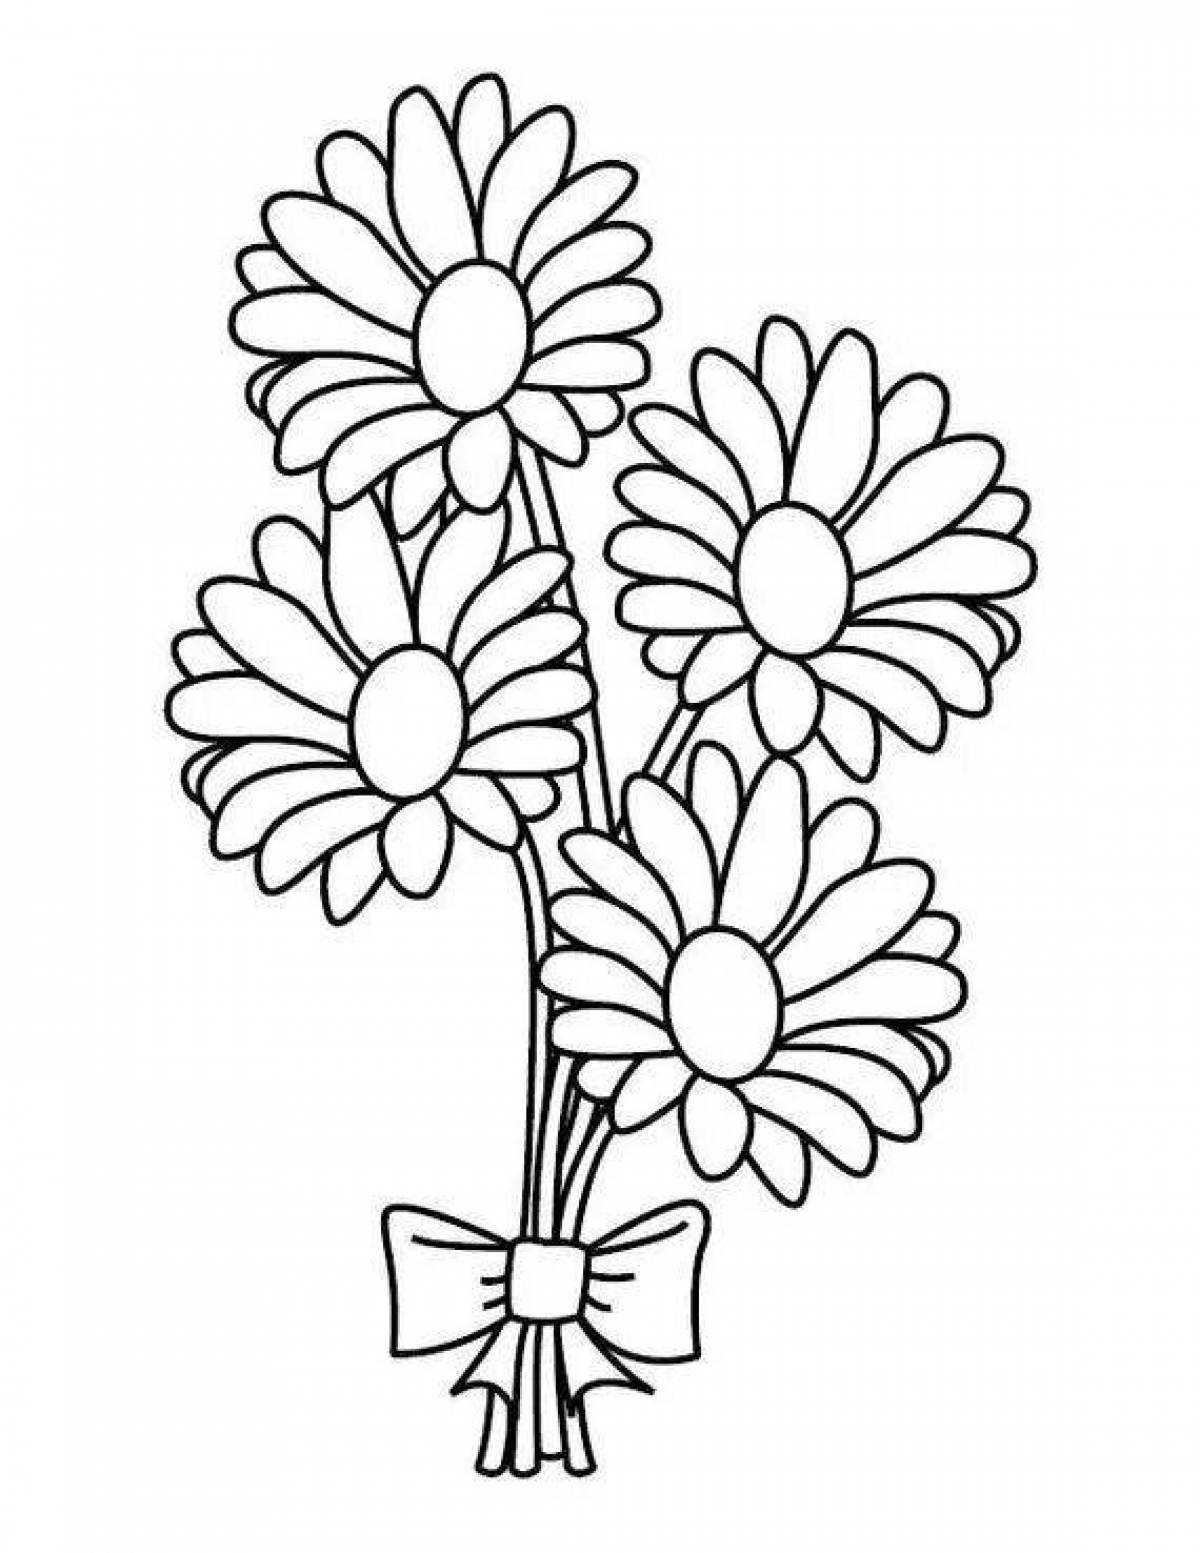 Coloring page charming chamomile flowers